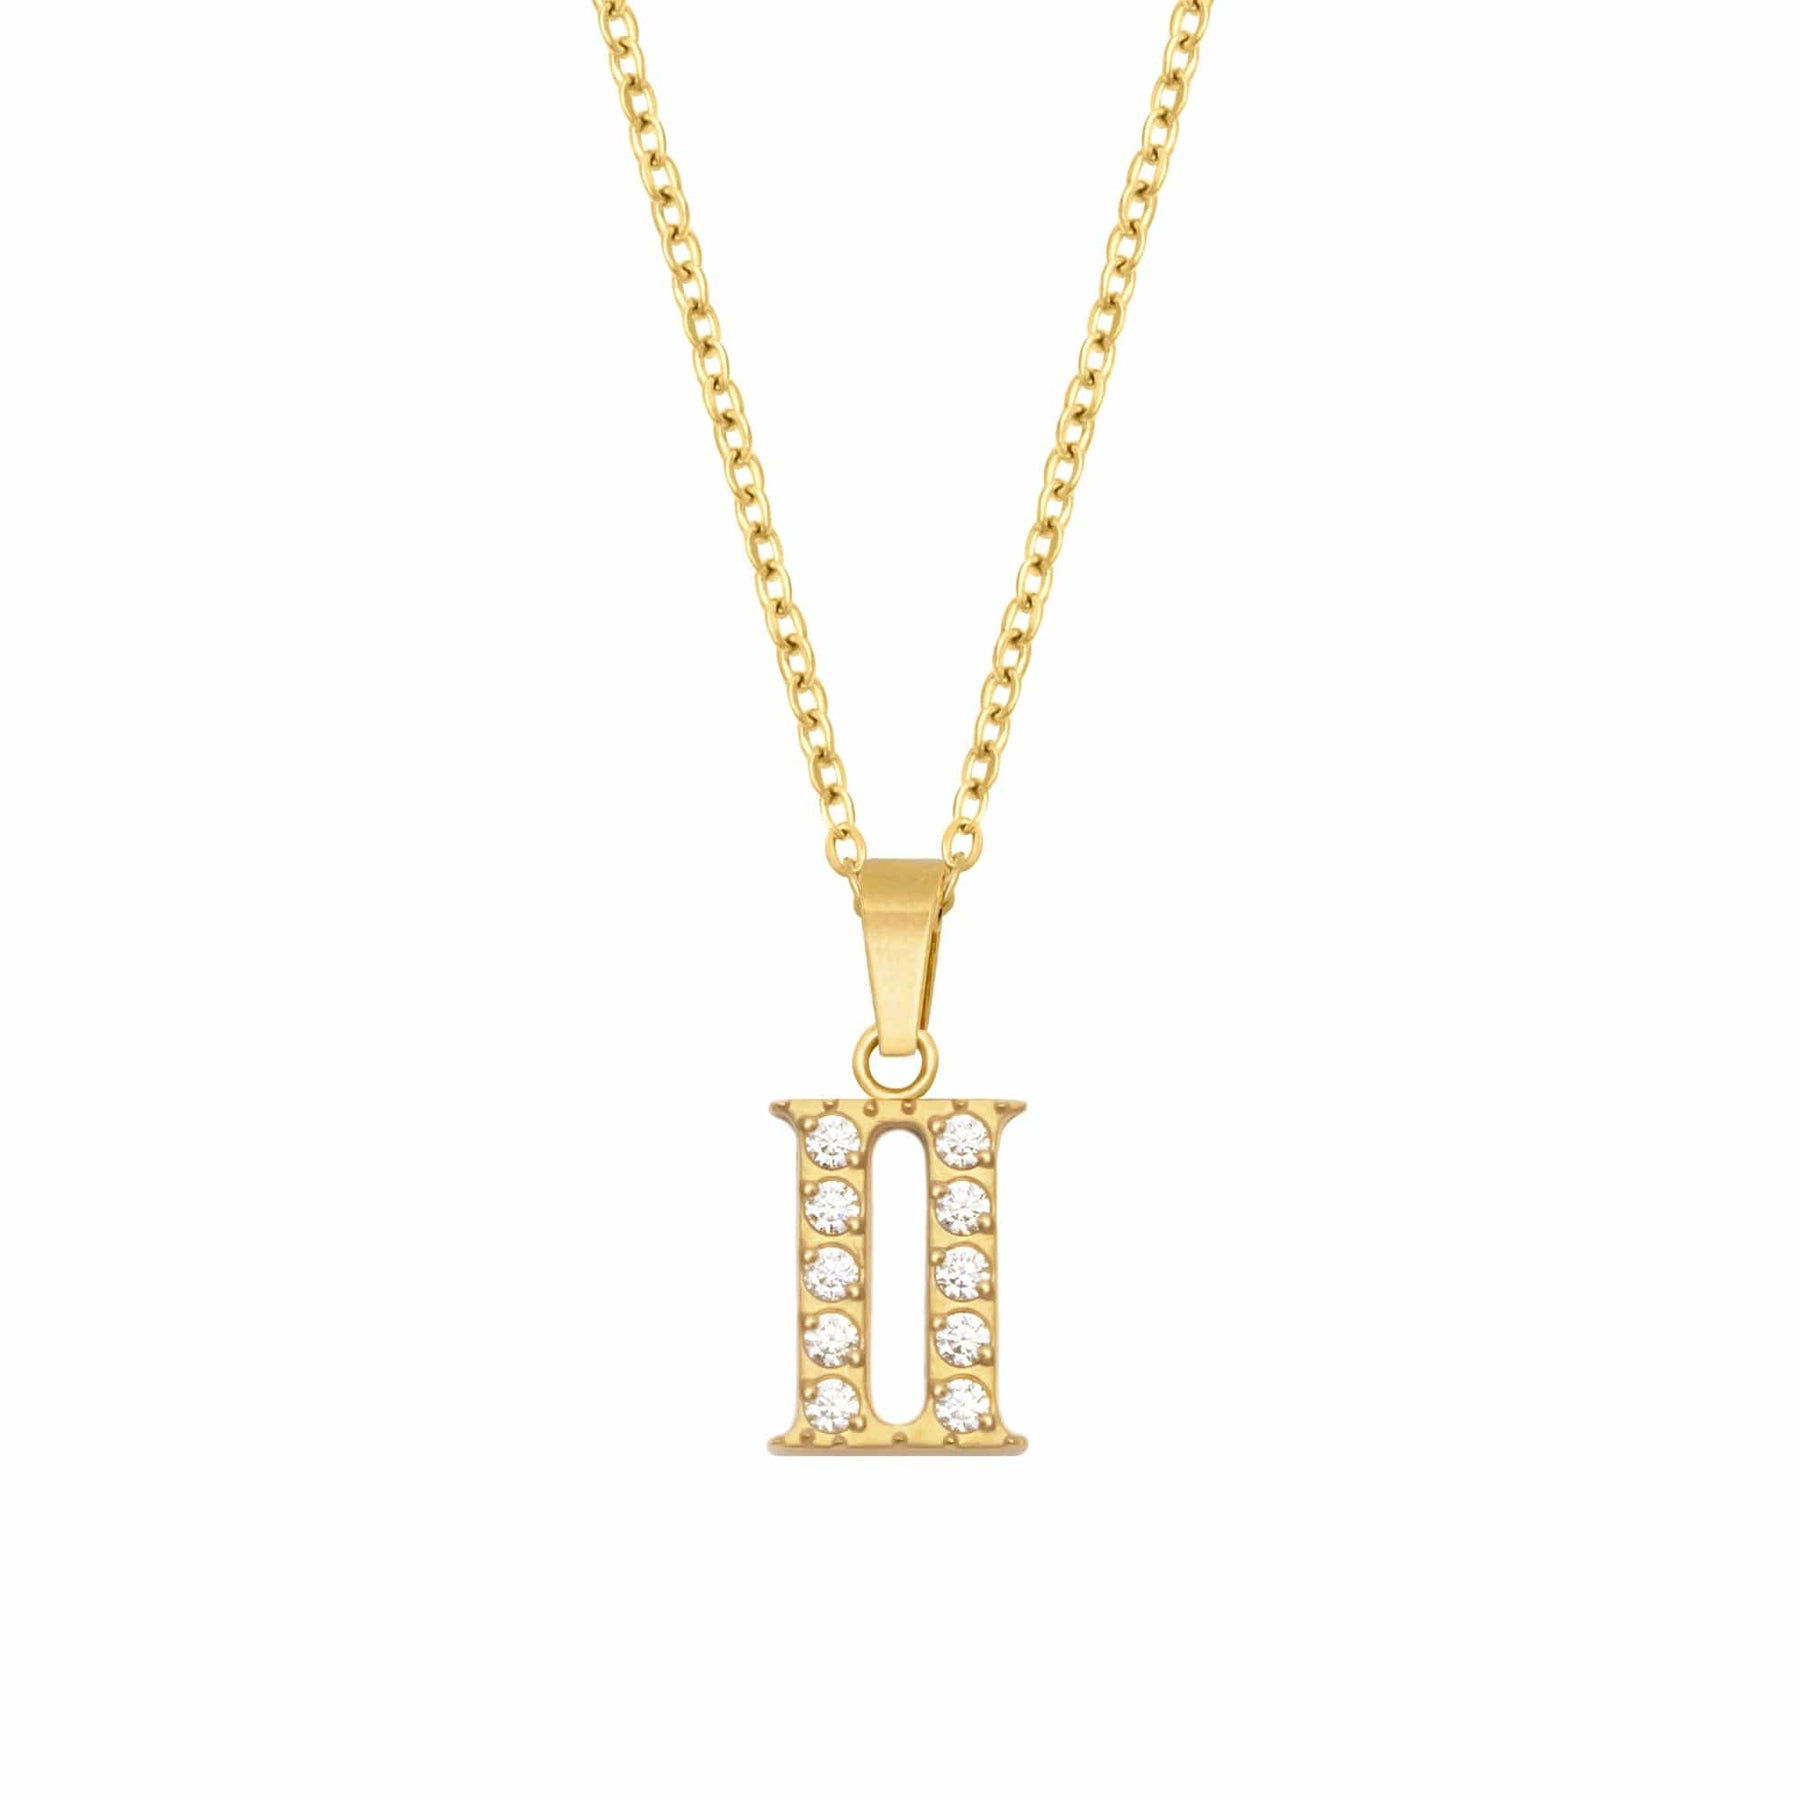 BohoMoon Stainless Steel Roman Numerals Necklace Gold / II